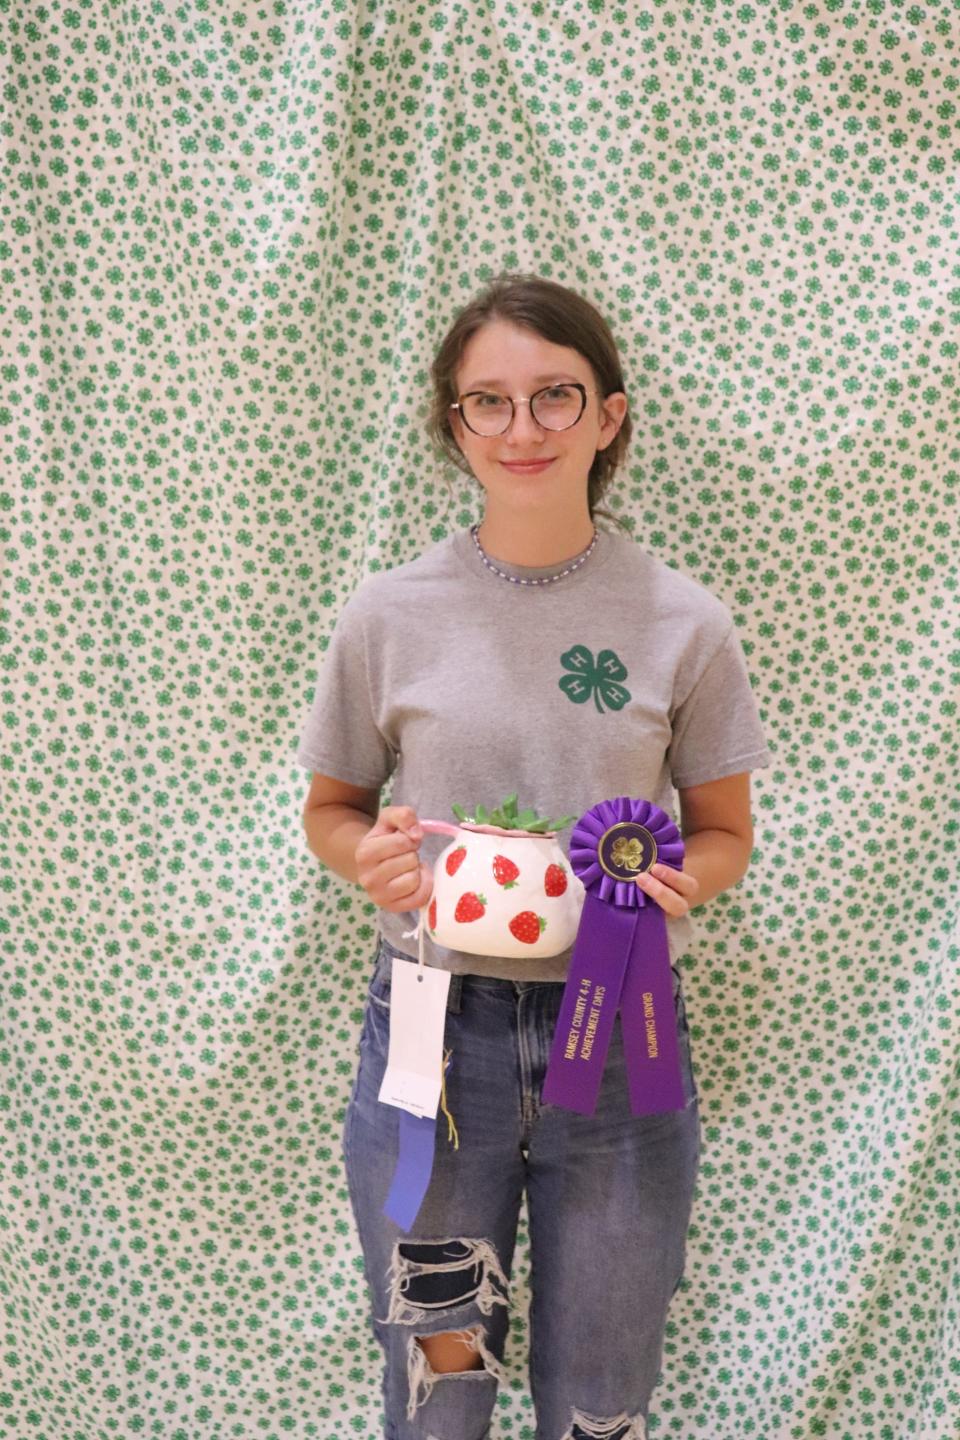 Rochelle Jacobson – Ramsey Riders 4-H Club